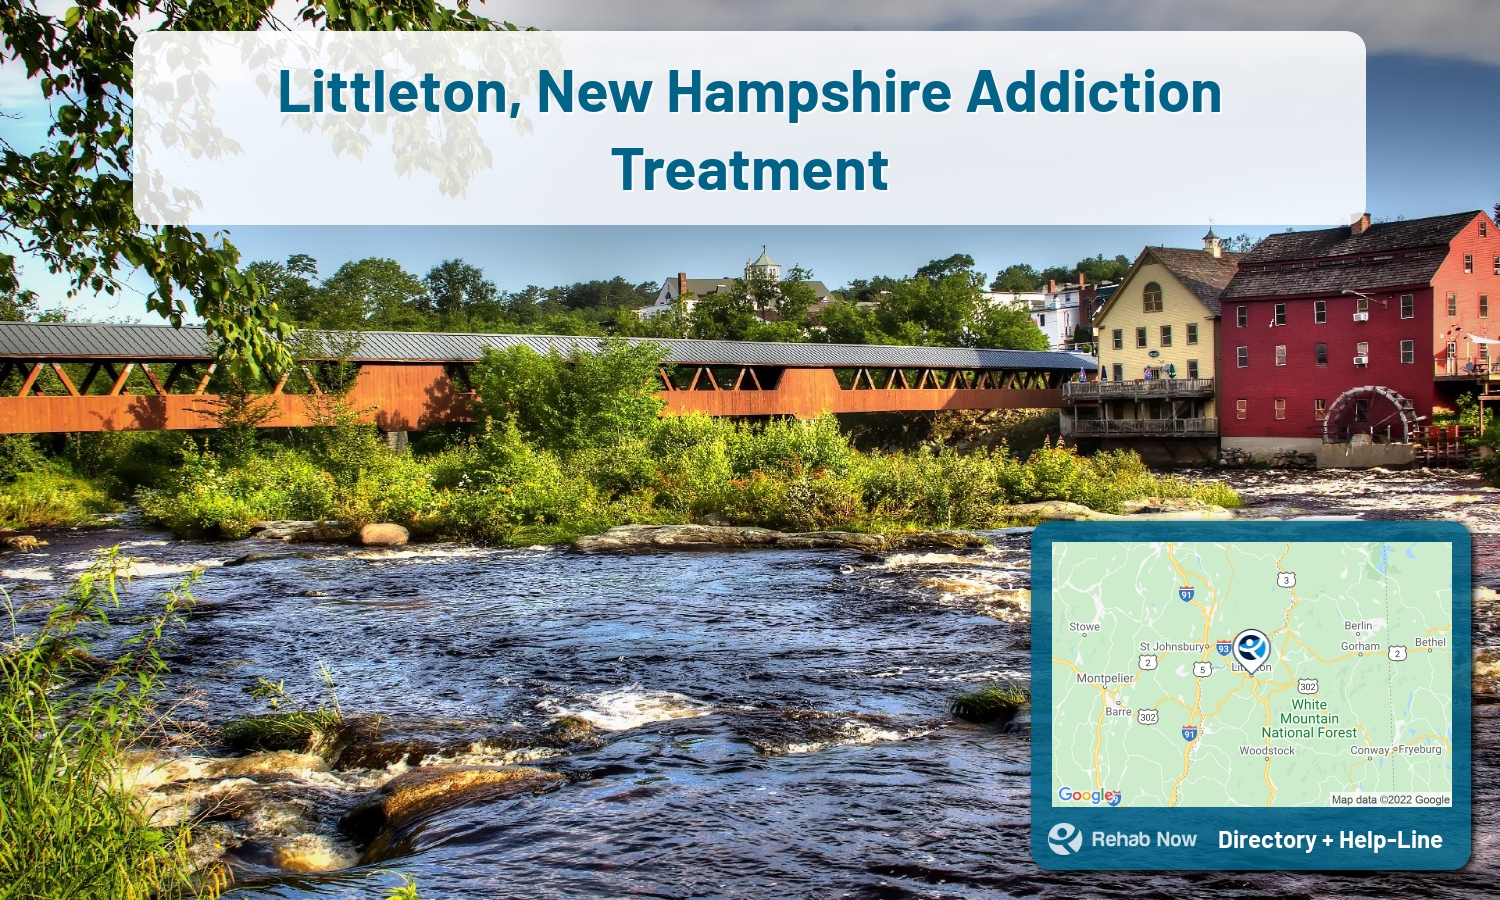 View options, availability, treatment methods, and more, for drug rehab and alcohol treatment in Littleton, New Hampshire